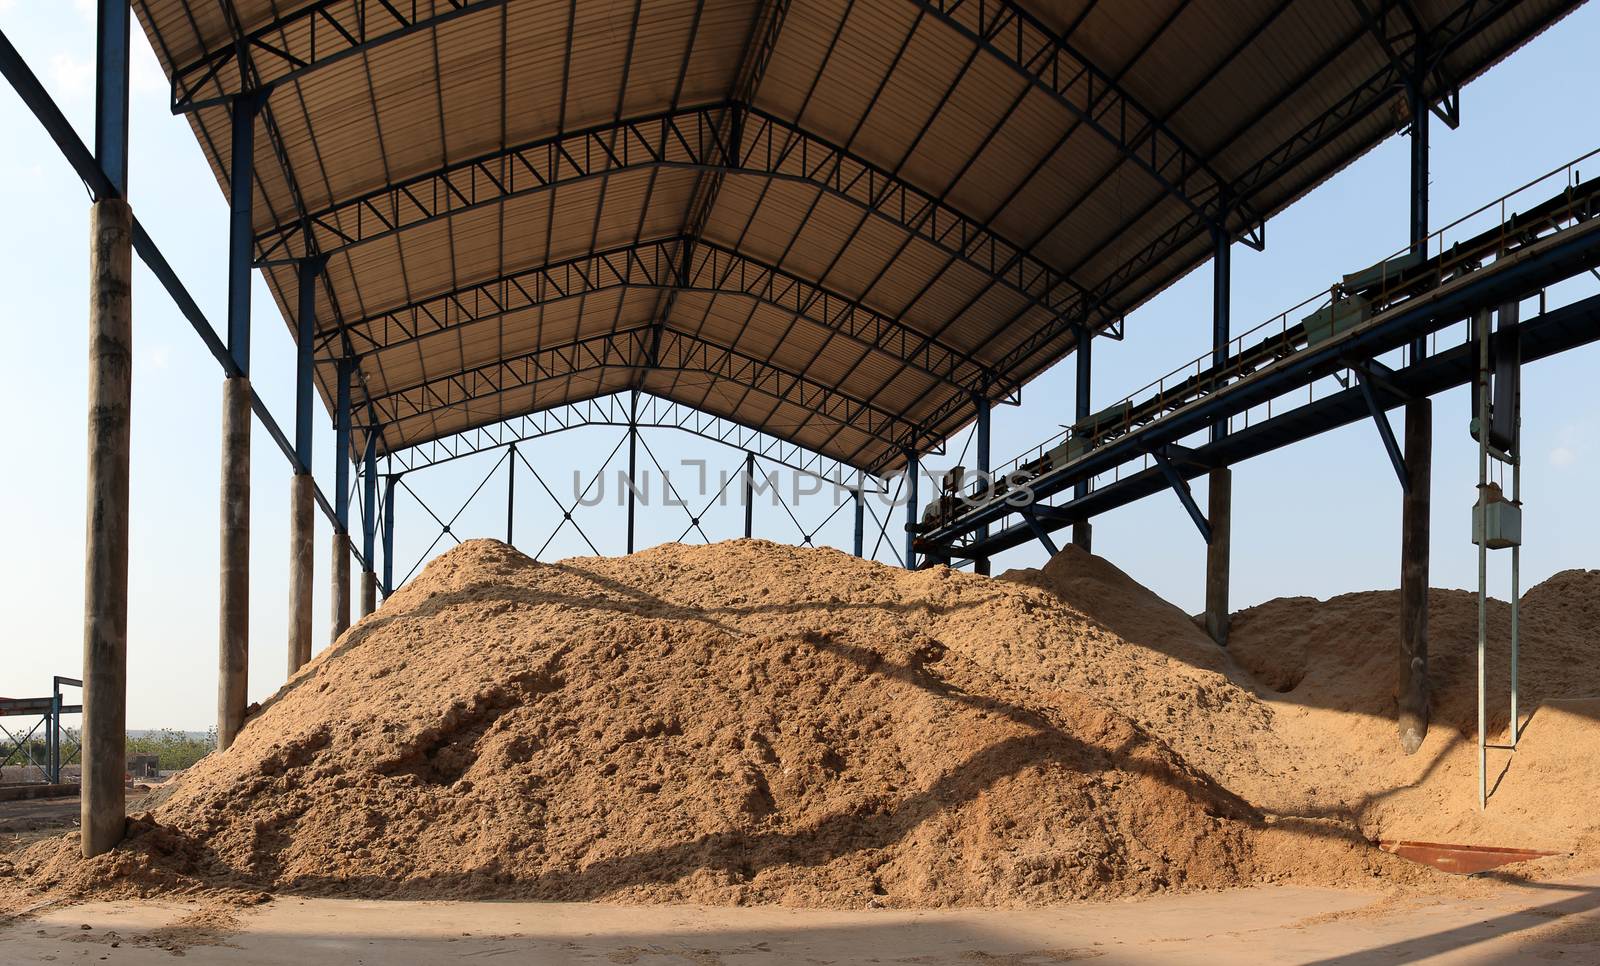 Bagasse is the fibrous matter that remains after sugarcane or sorghum stalks are crushed to extract their juice. Bagasse is used as a biofuel and in the manufacture of pulp and building materials